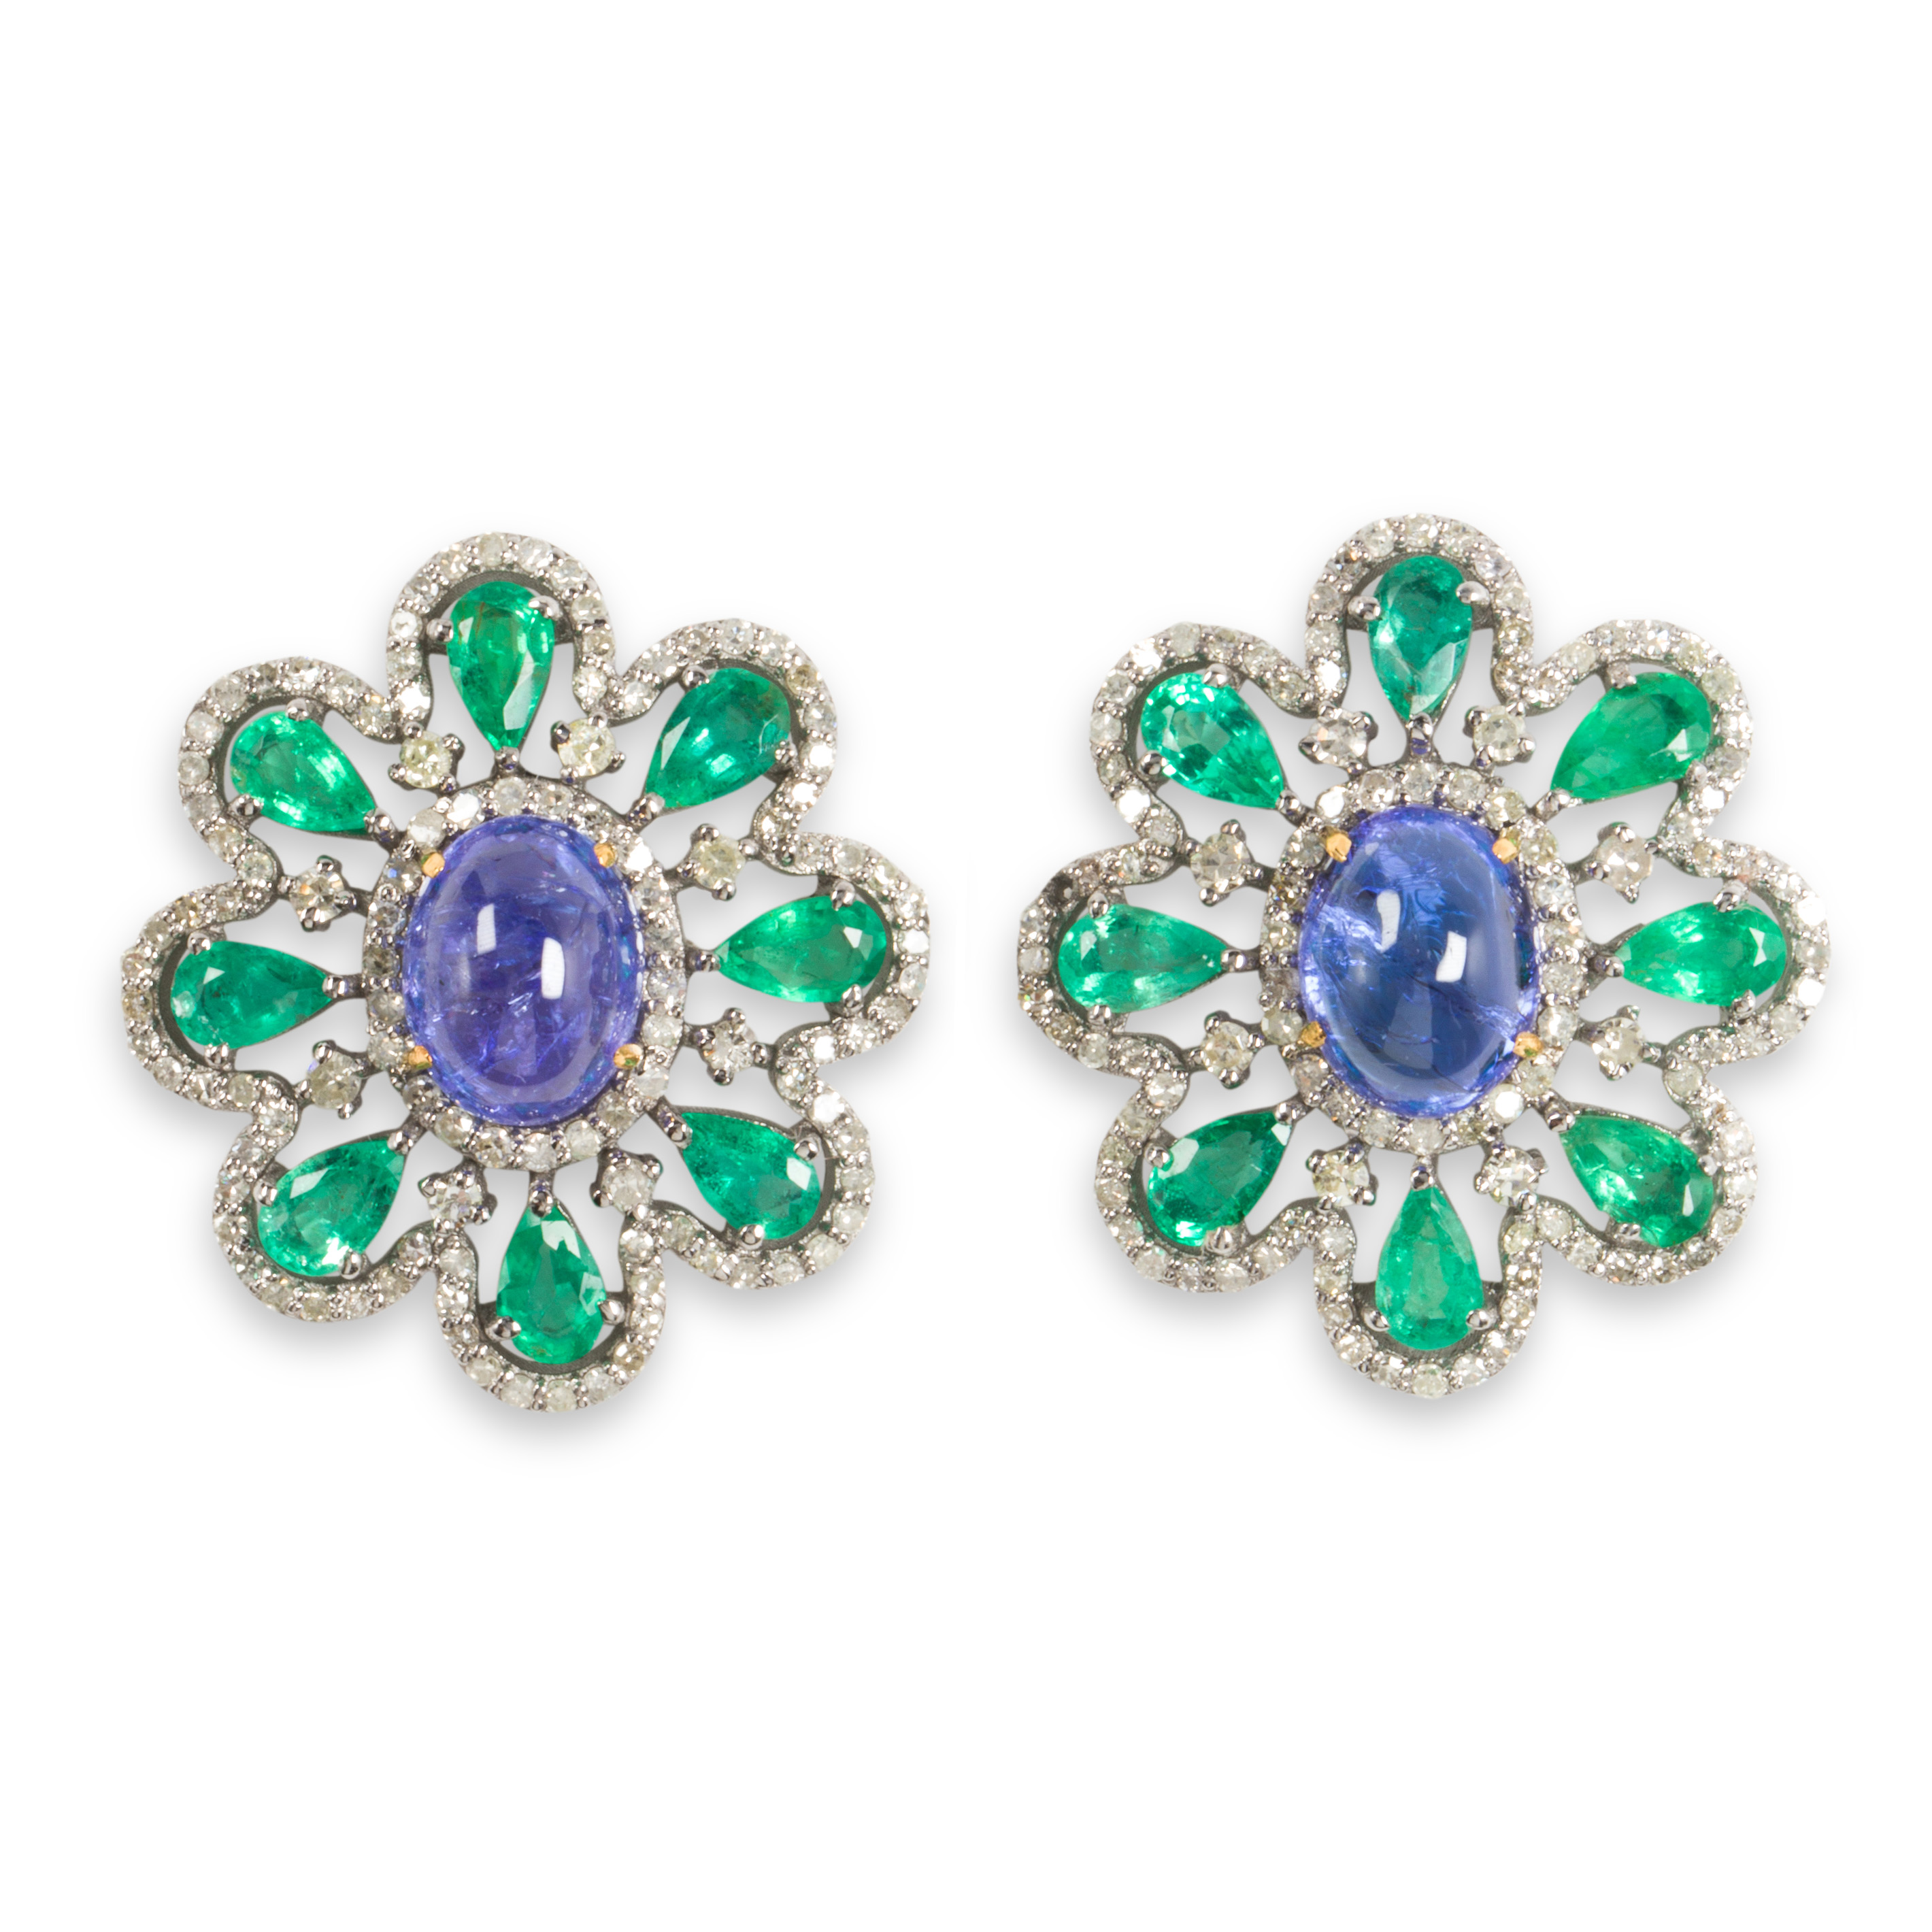 A PAIR OF TANZANITE EMERALD AND 3a41ac